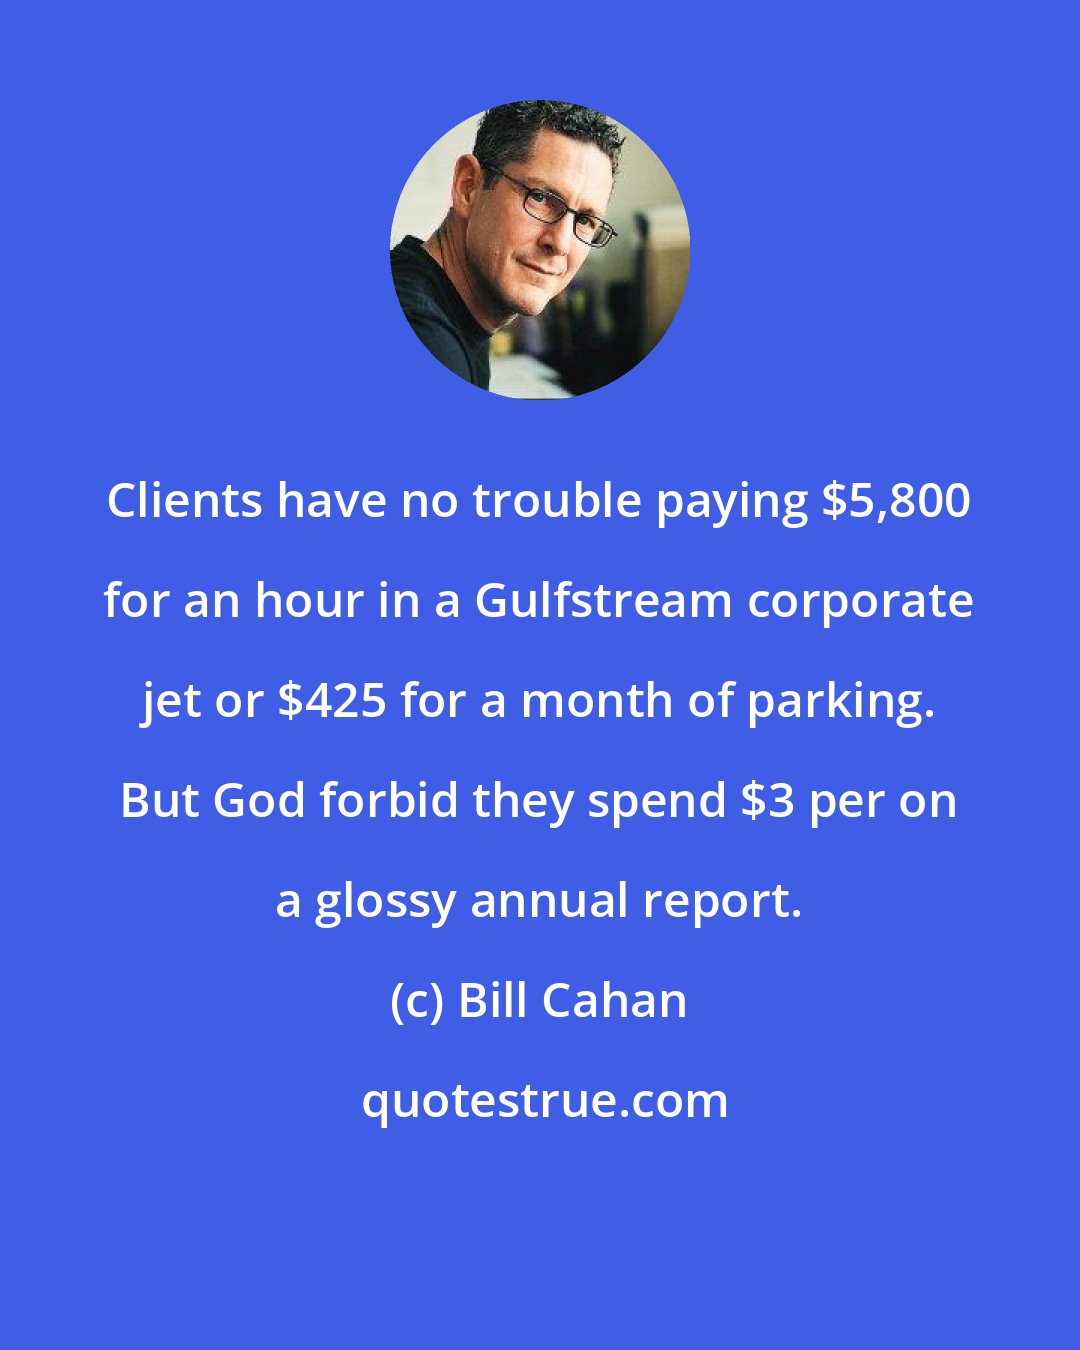 Bill Cahan: Clients have no trouble paying $5,800 for an hour in a Gulfstream corporate jet or $425 for a month of parking. But God forbid they spend $3 per on a glossy annual report.